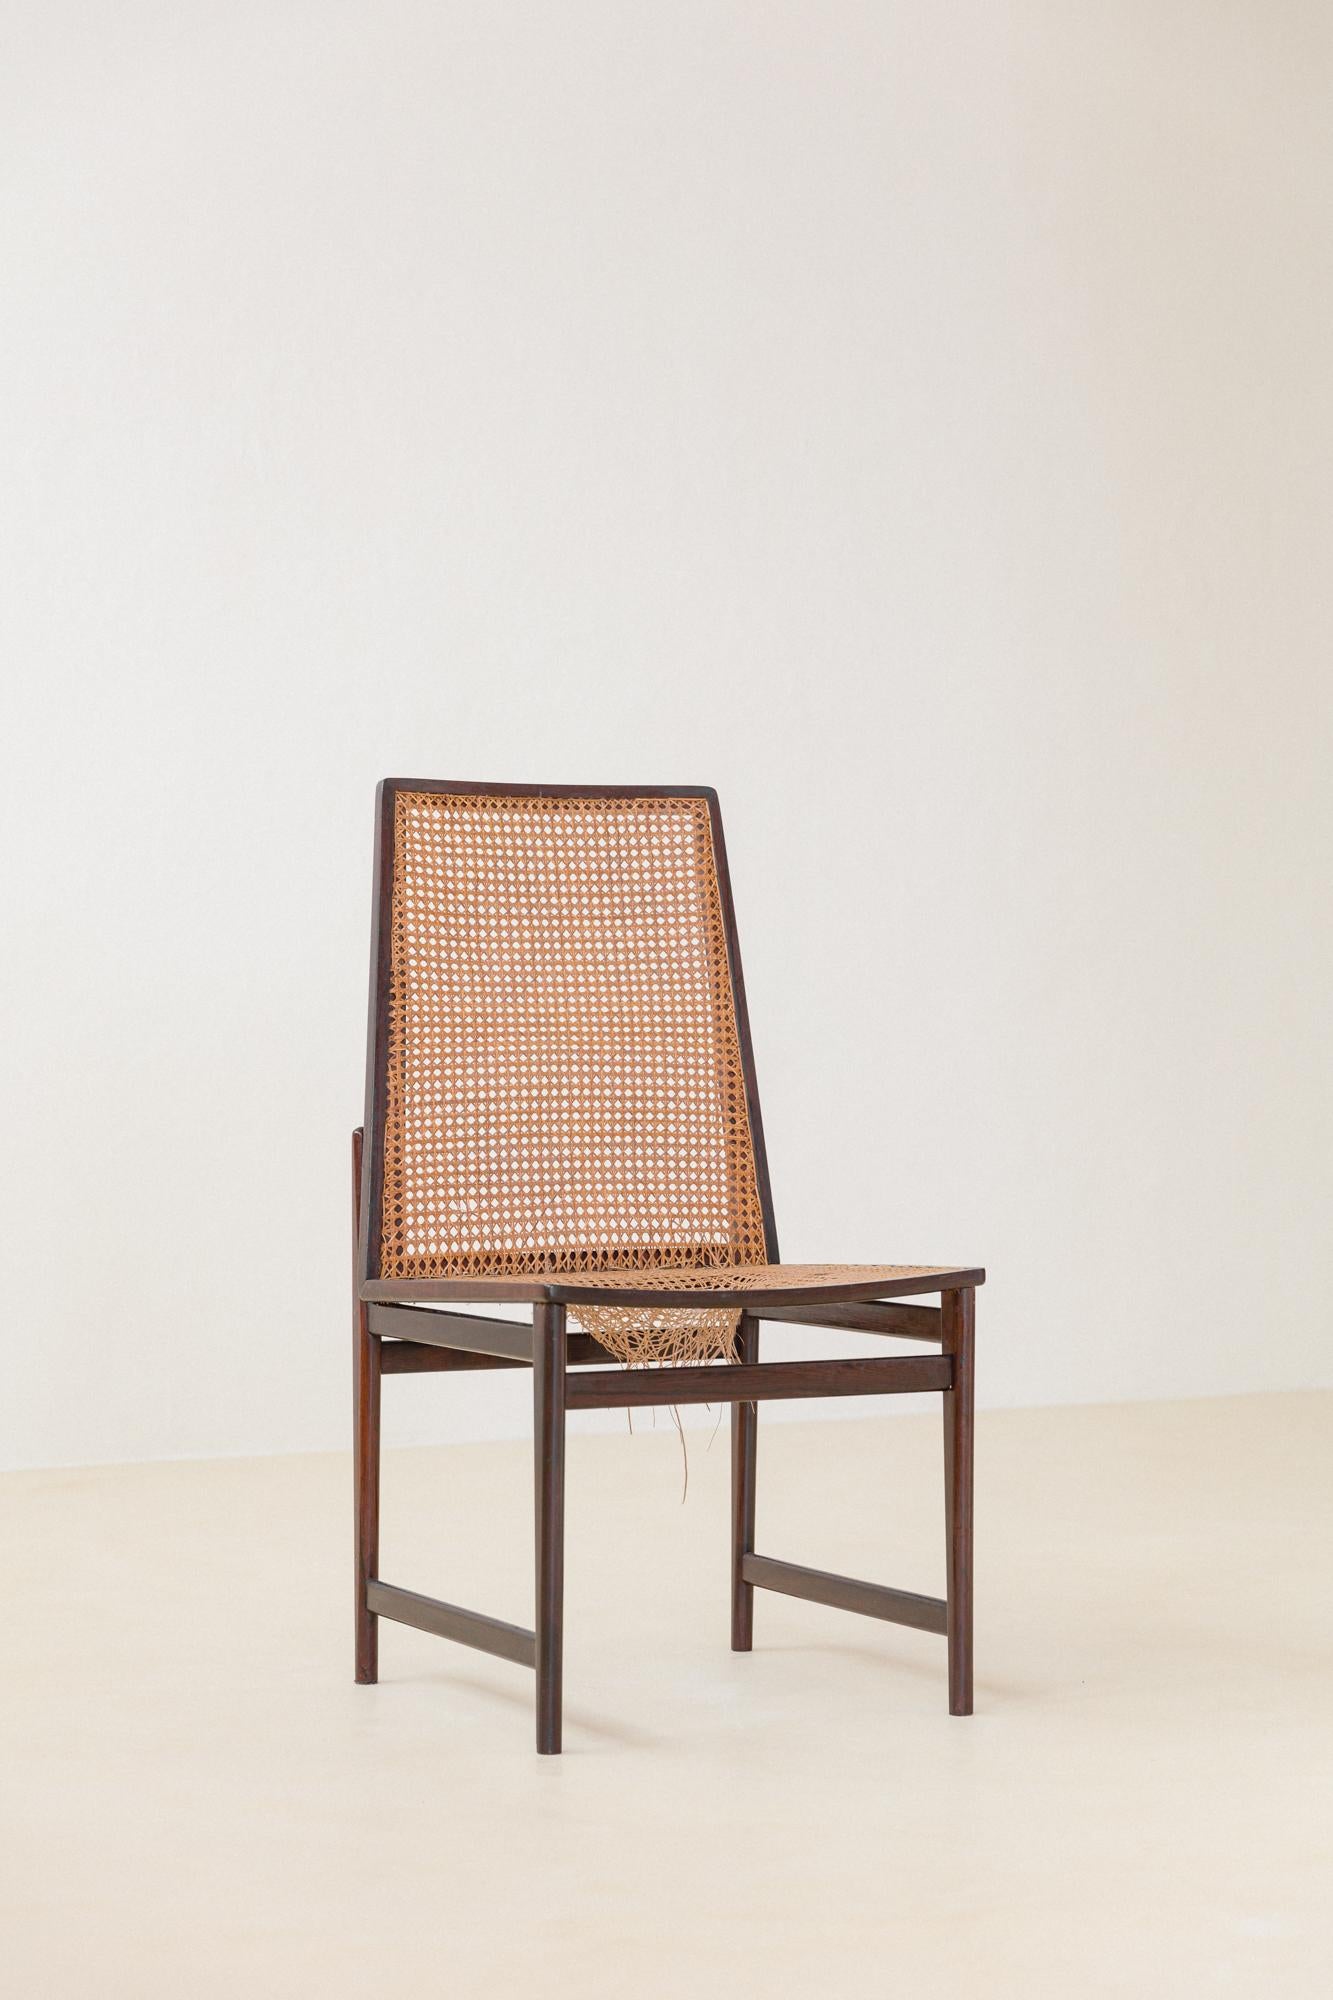 Hand-Woven Set of 8 Rosewood and Cane Chairs by Móveis Cantù, 1960s, Brazilian Midcentury For Sale